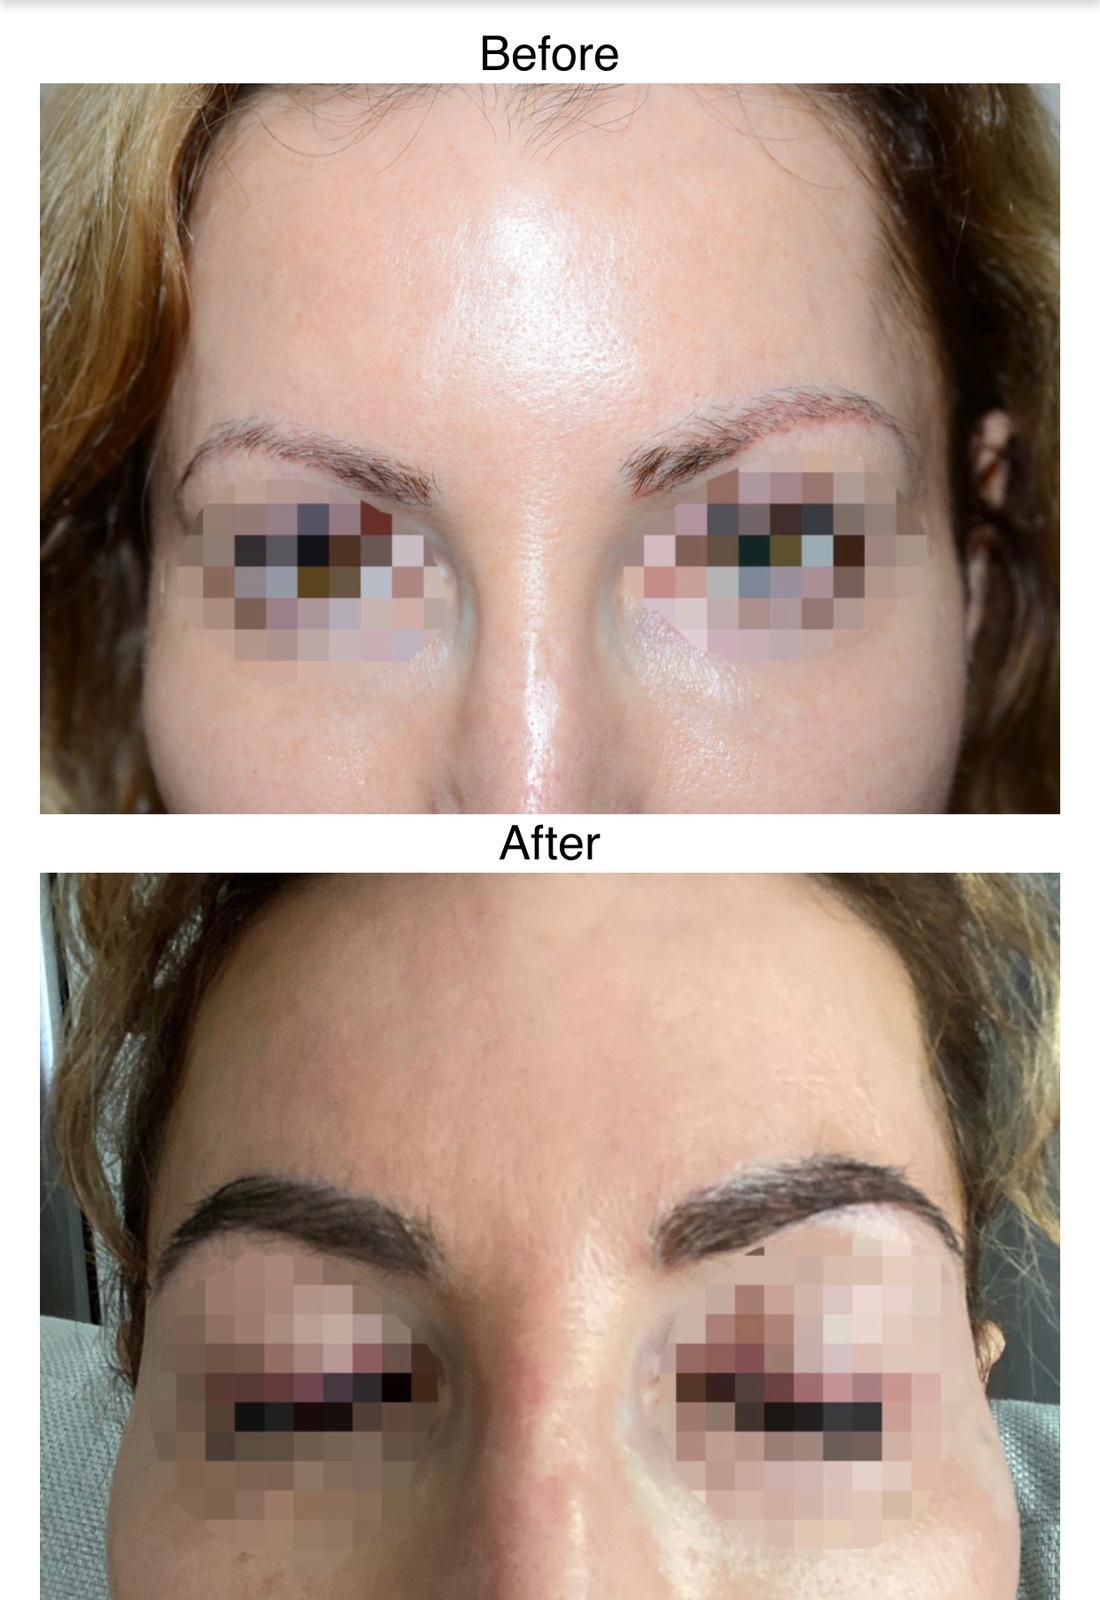 A female before and after undergoing a FUE eyebrow hair transplant